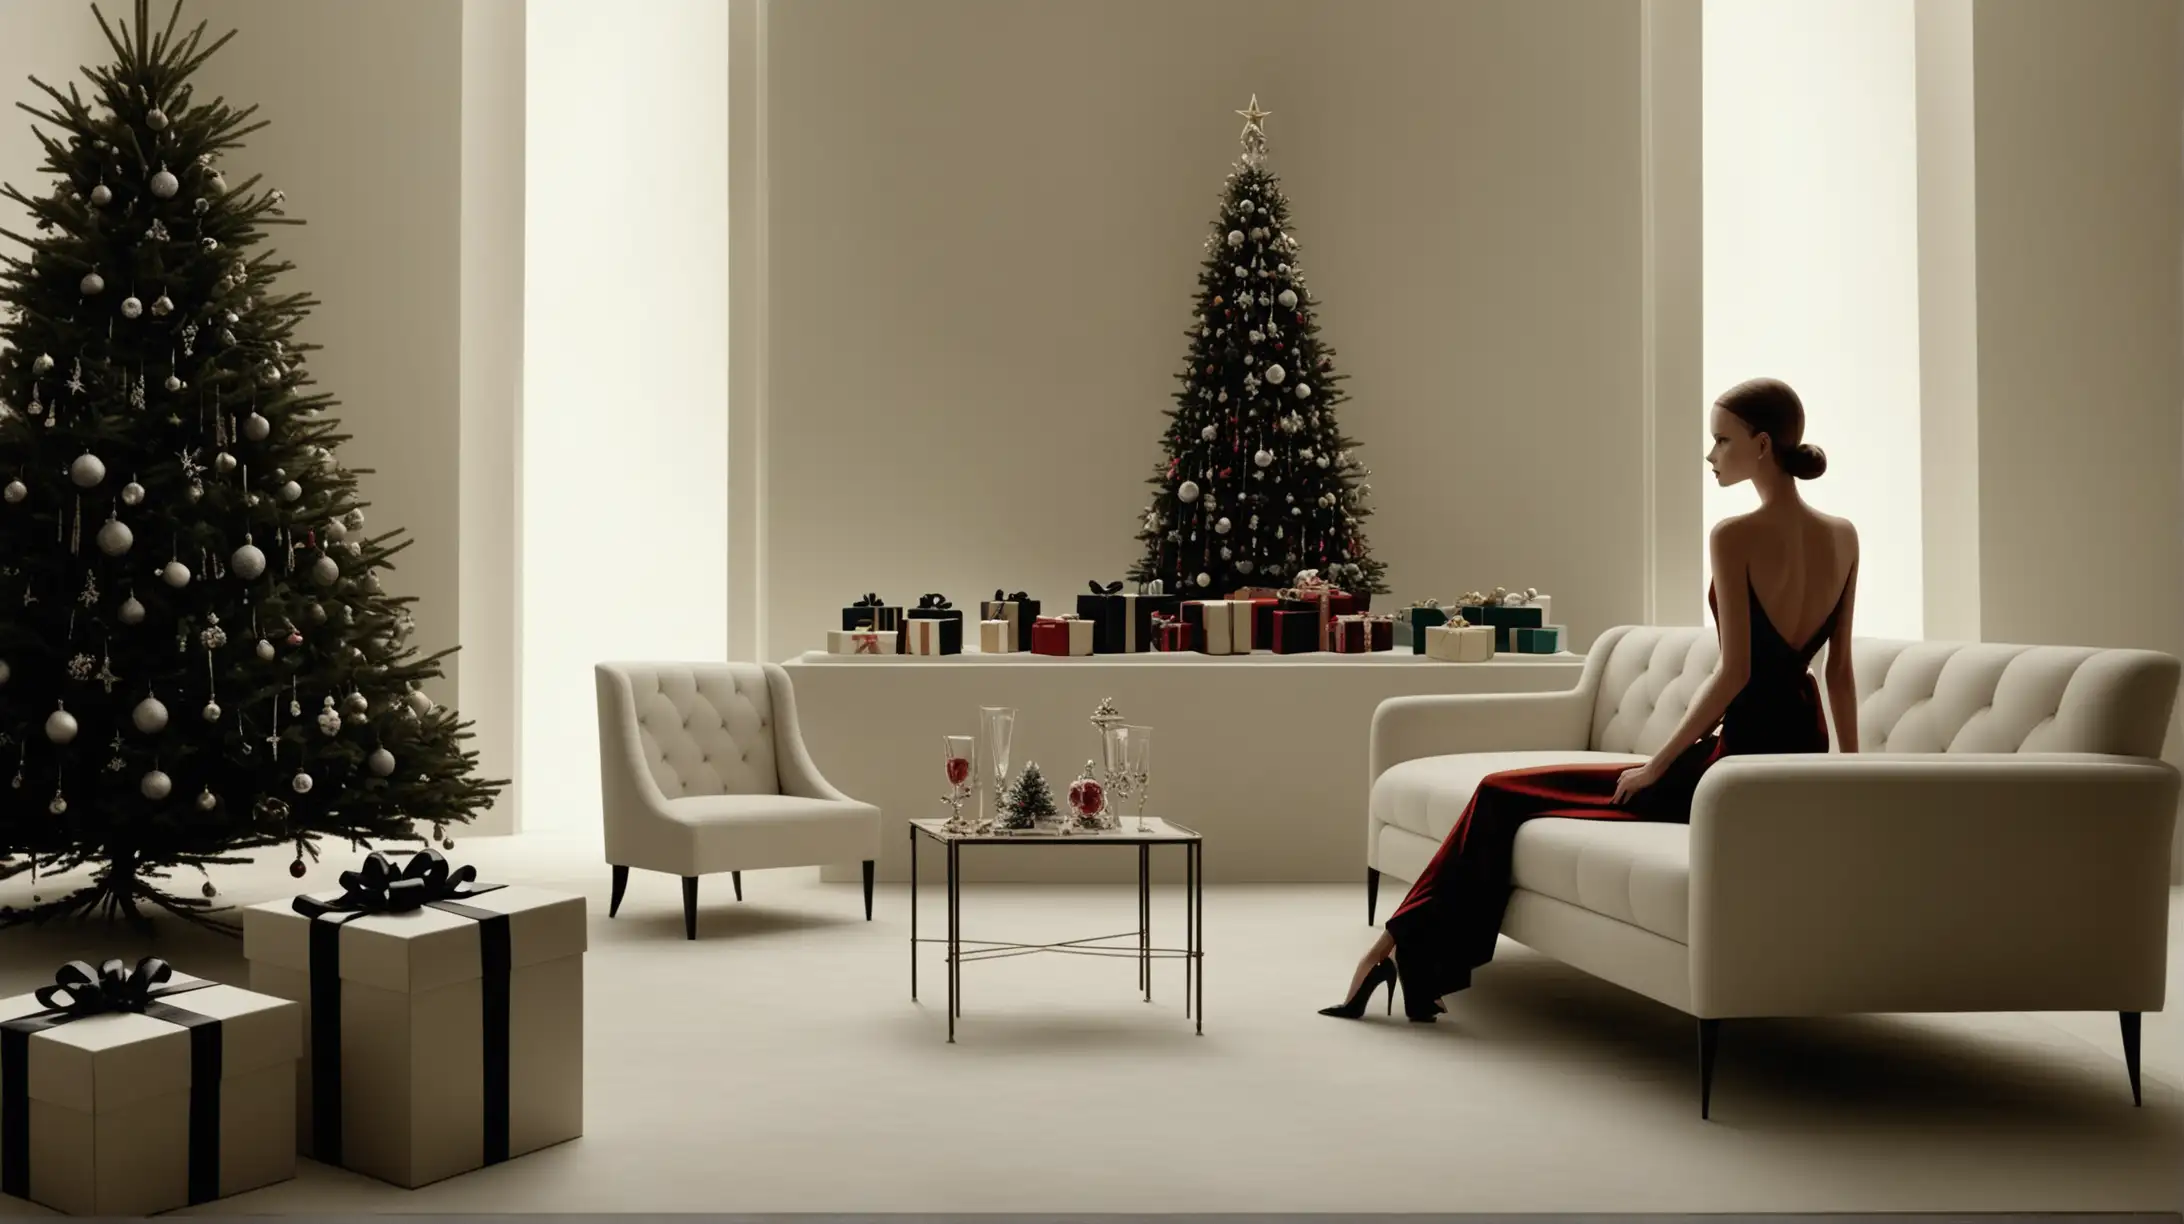 An avant-garde aesthetic with a touch of futuristic minimalism sets the tone for this sleek and chic cinematic wide shot designed for Vogue. The image captures an over-the-shoulder angle from the back of a young model in a stylish outfit, as she sits on a couch in the foreground, as she gazes at the gift placed under one Christmas tree in the background. The room exudes a minimalist boho vibe, infused with an eclectic mix of styles.